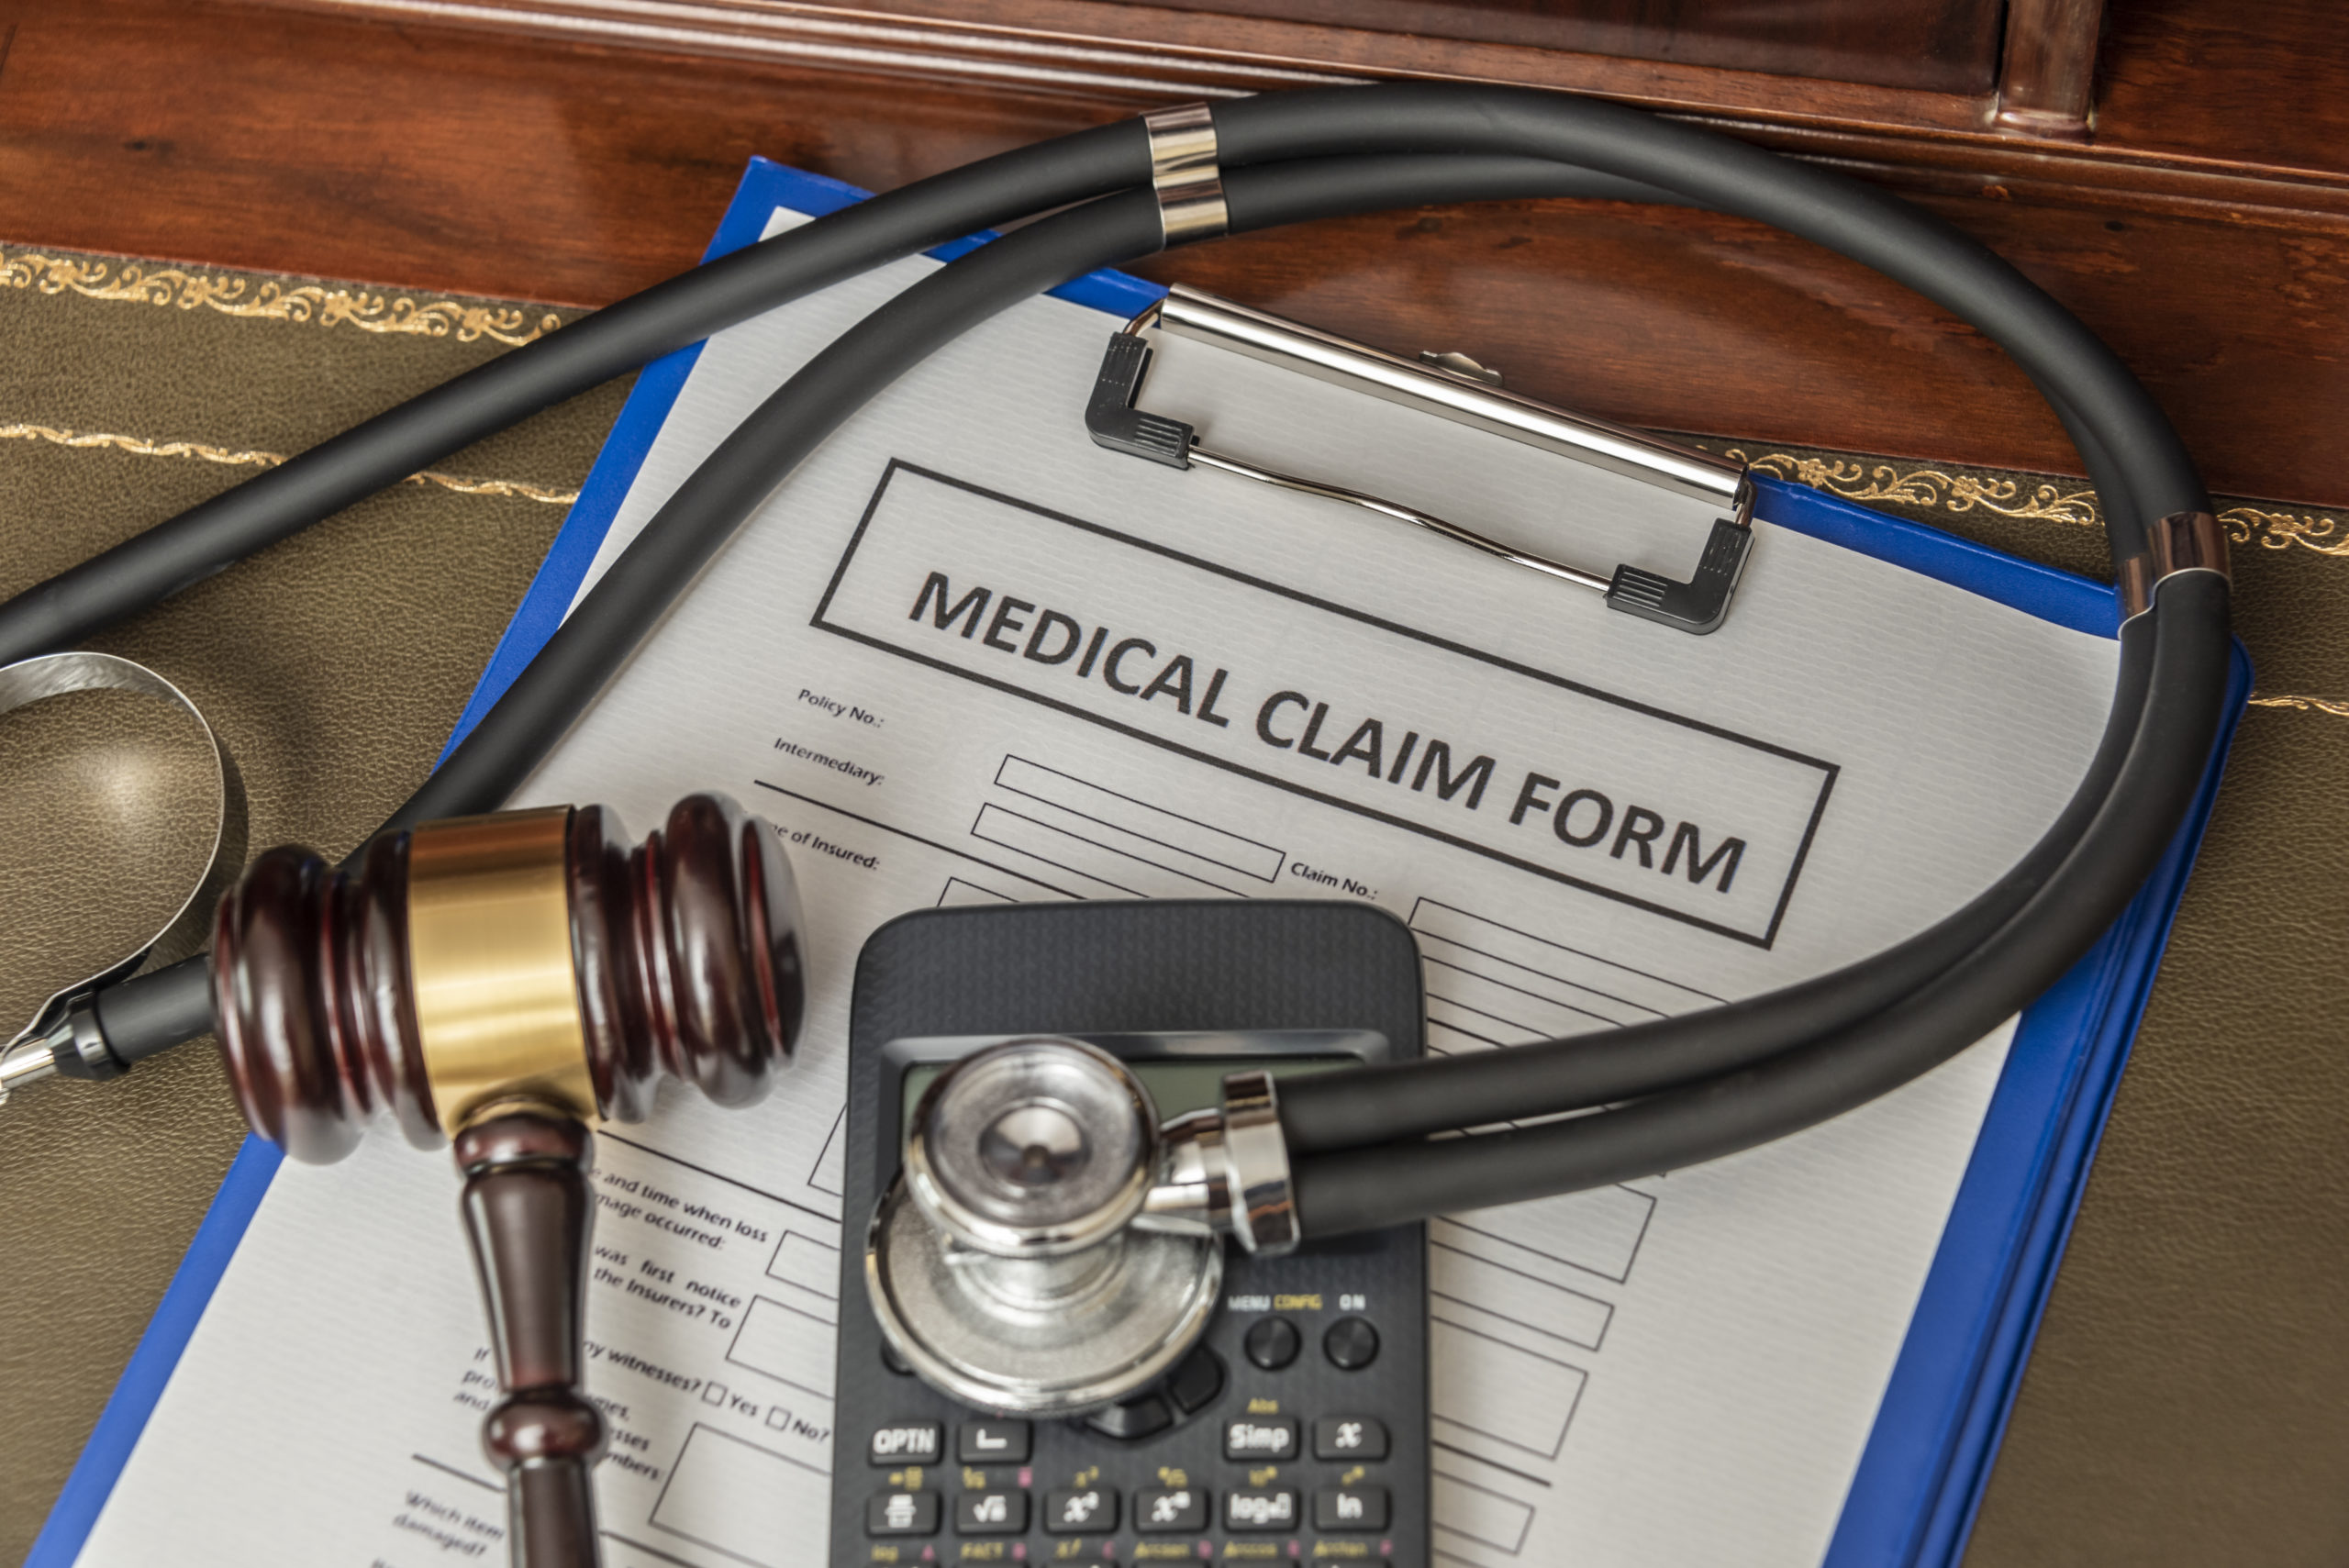 Medical malpractice claim form for lawyers. Calculation of compensation